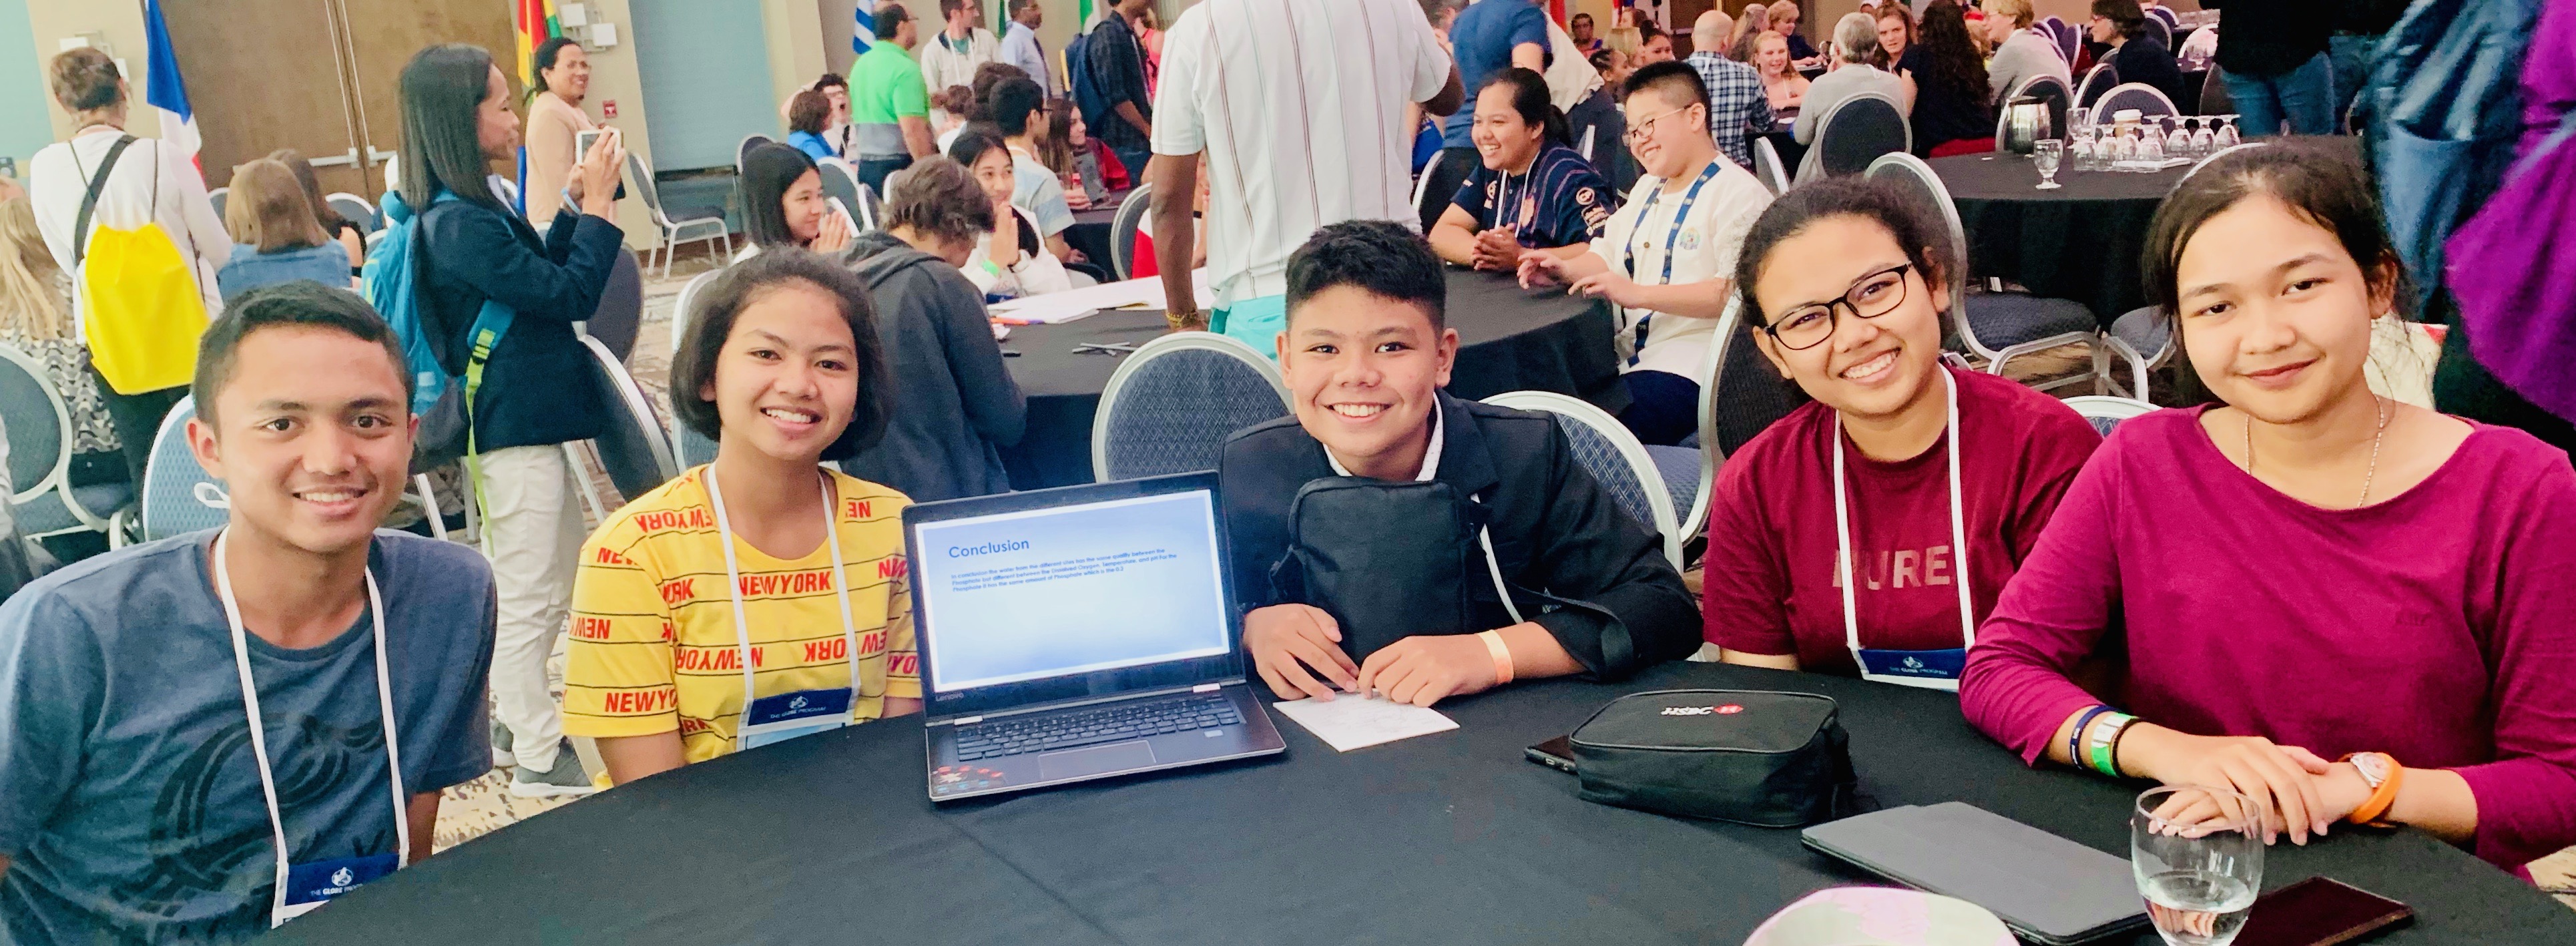 Five students sitting at a table, next to a laptop showing their project, at a GLOBE conference.